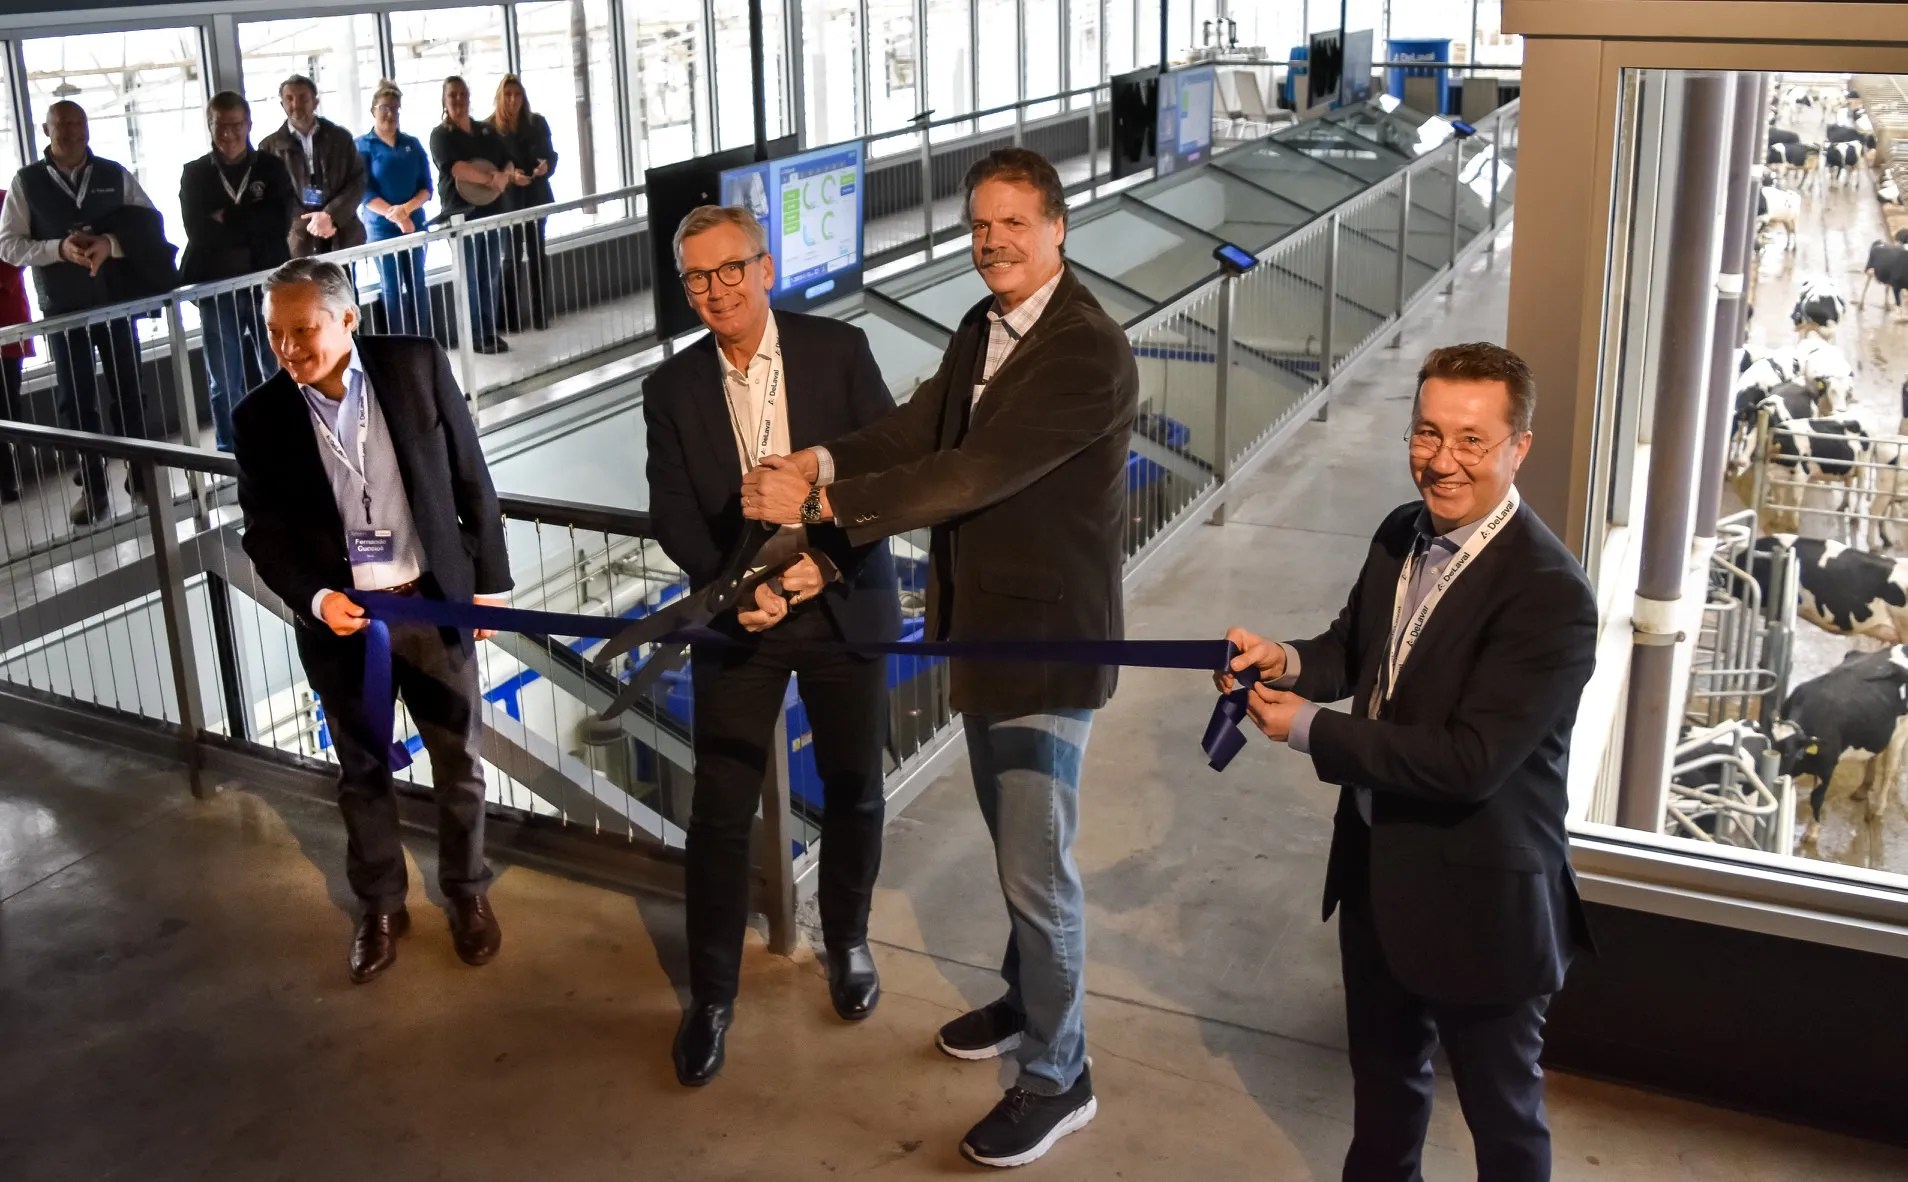 Joakim Rosengren, president and CEO of DeLaval, second from left, and Mike McCloskey, co-founder of Fair Oaks Farms, second from right, during a ribbon cutting ceremony in November 2019 to announce the opening of a new robot barn and visitor area at the dairy facility.